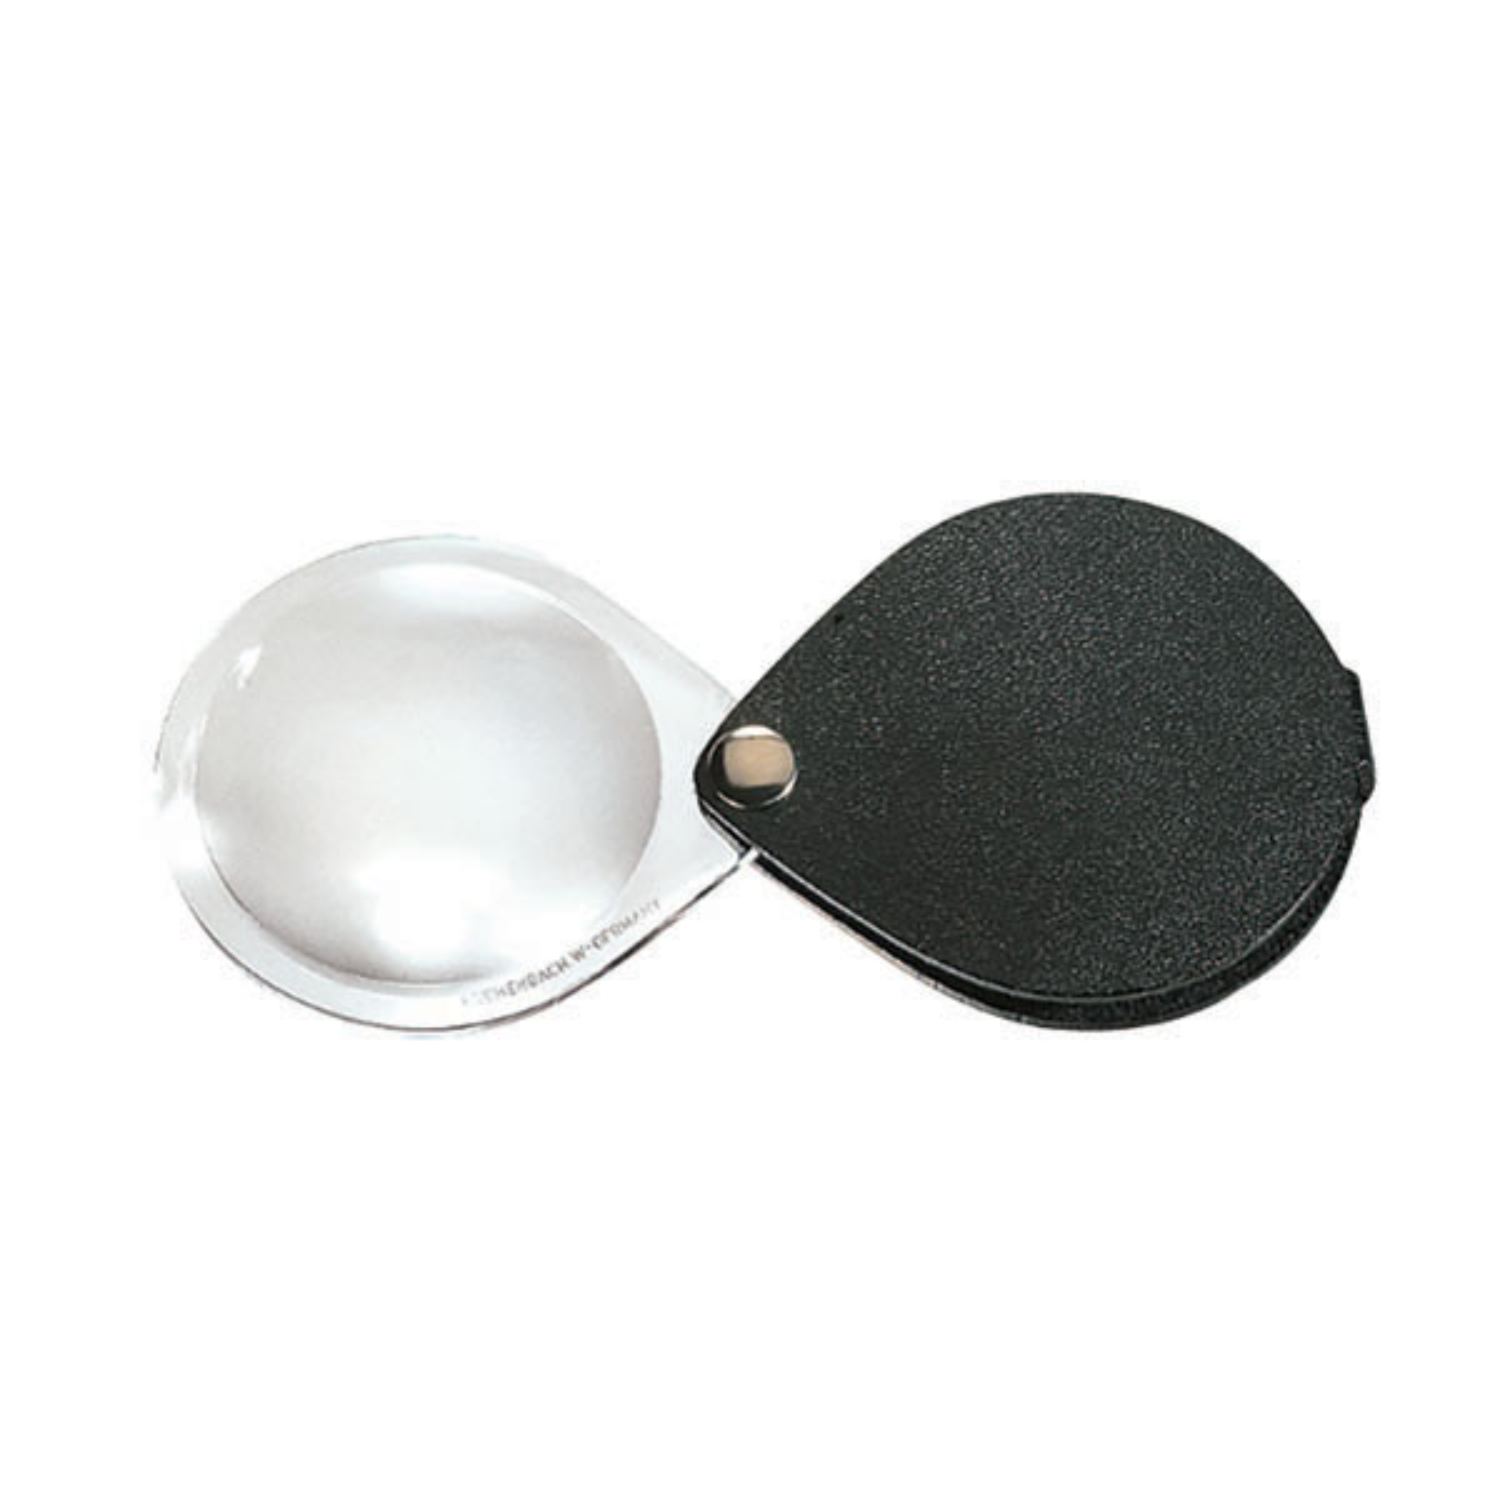 Image of a black classic round folding pocket magnifier from Eschenbach Optik